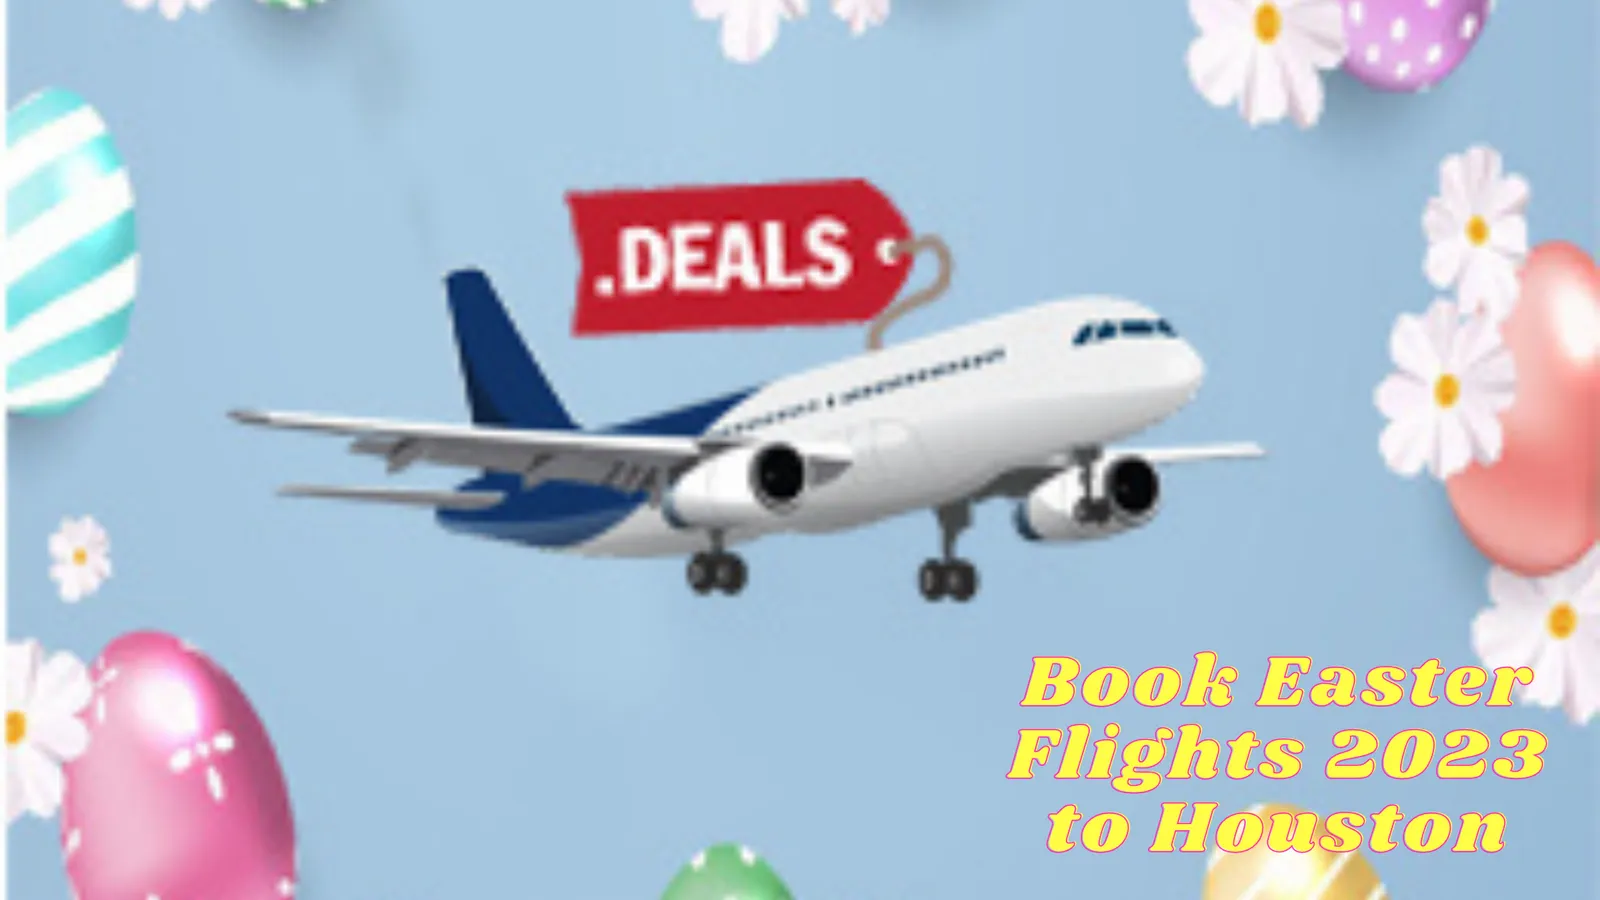 Book Easter Flights 2023 to Houston to encounter the best events ever